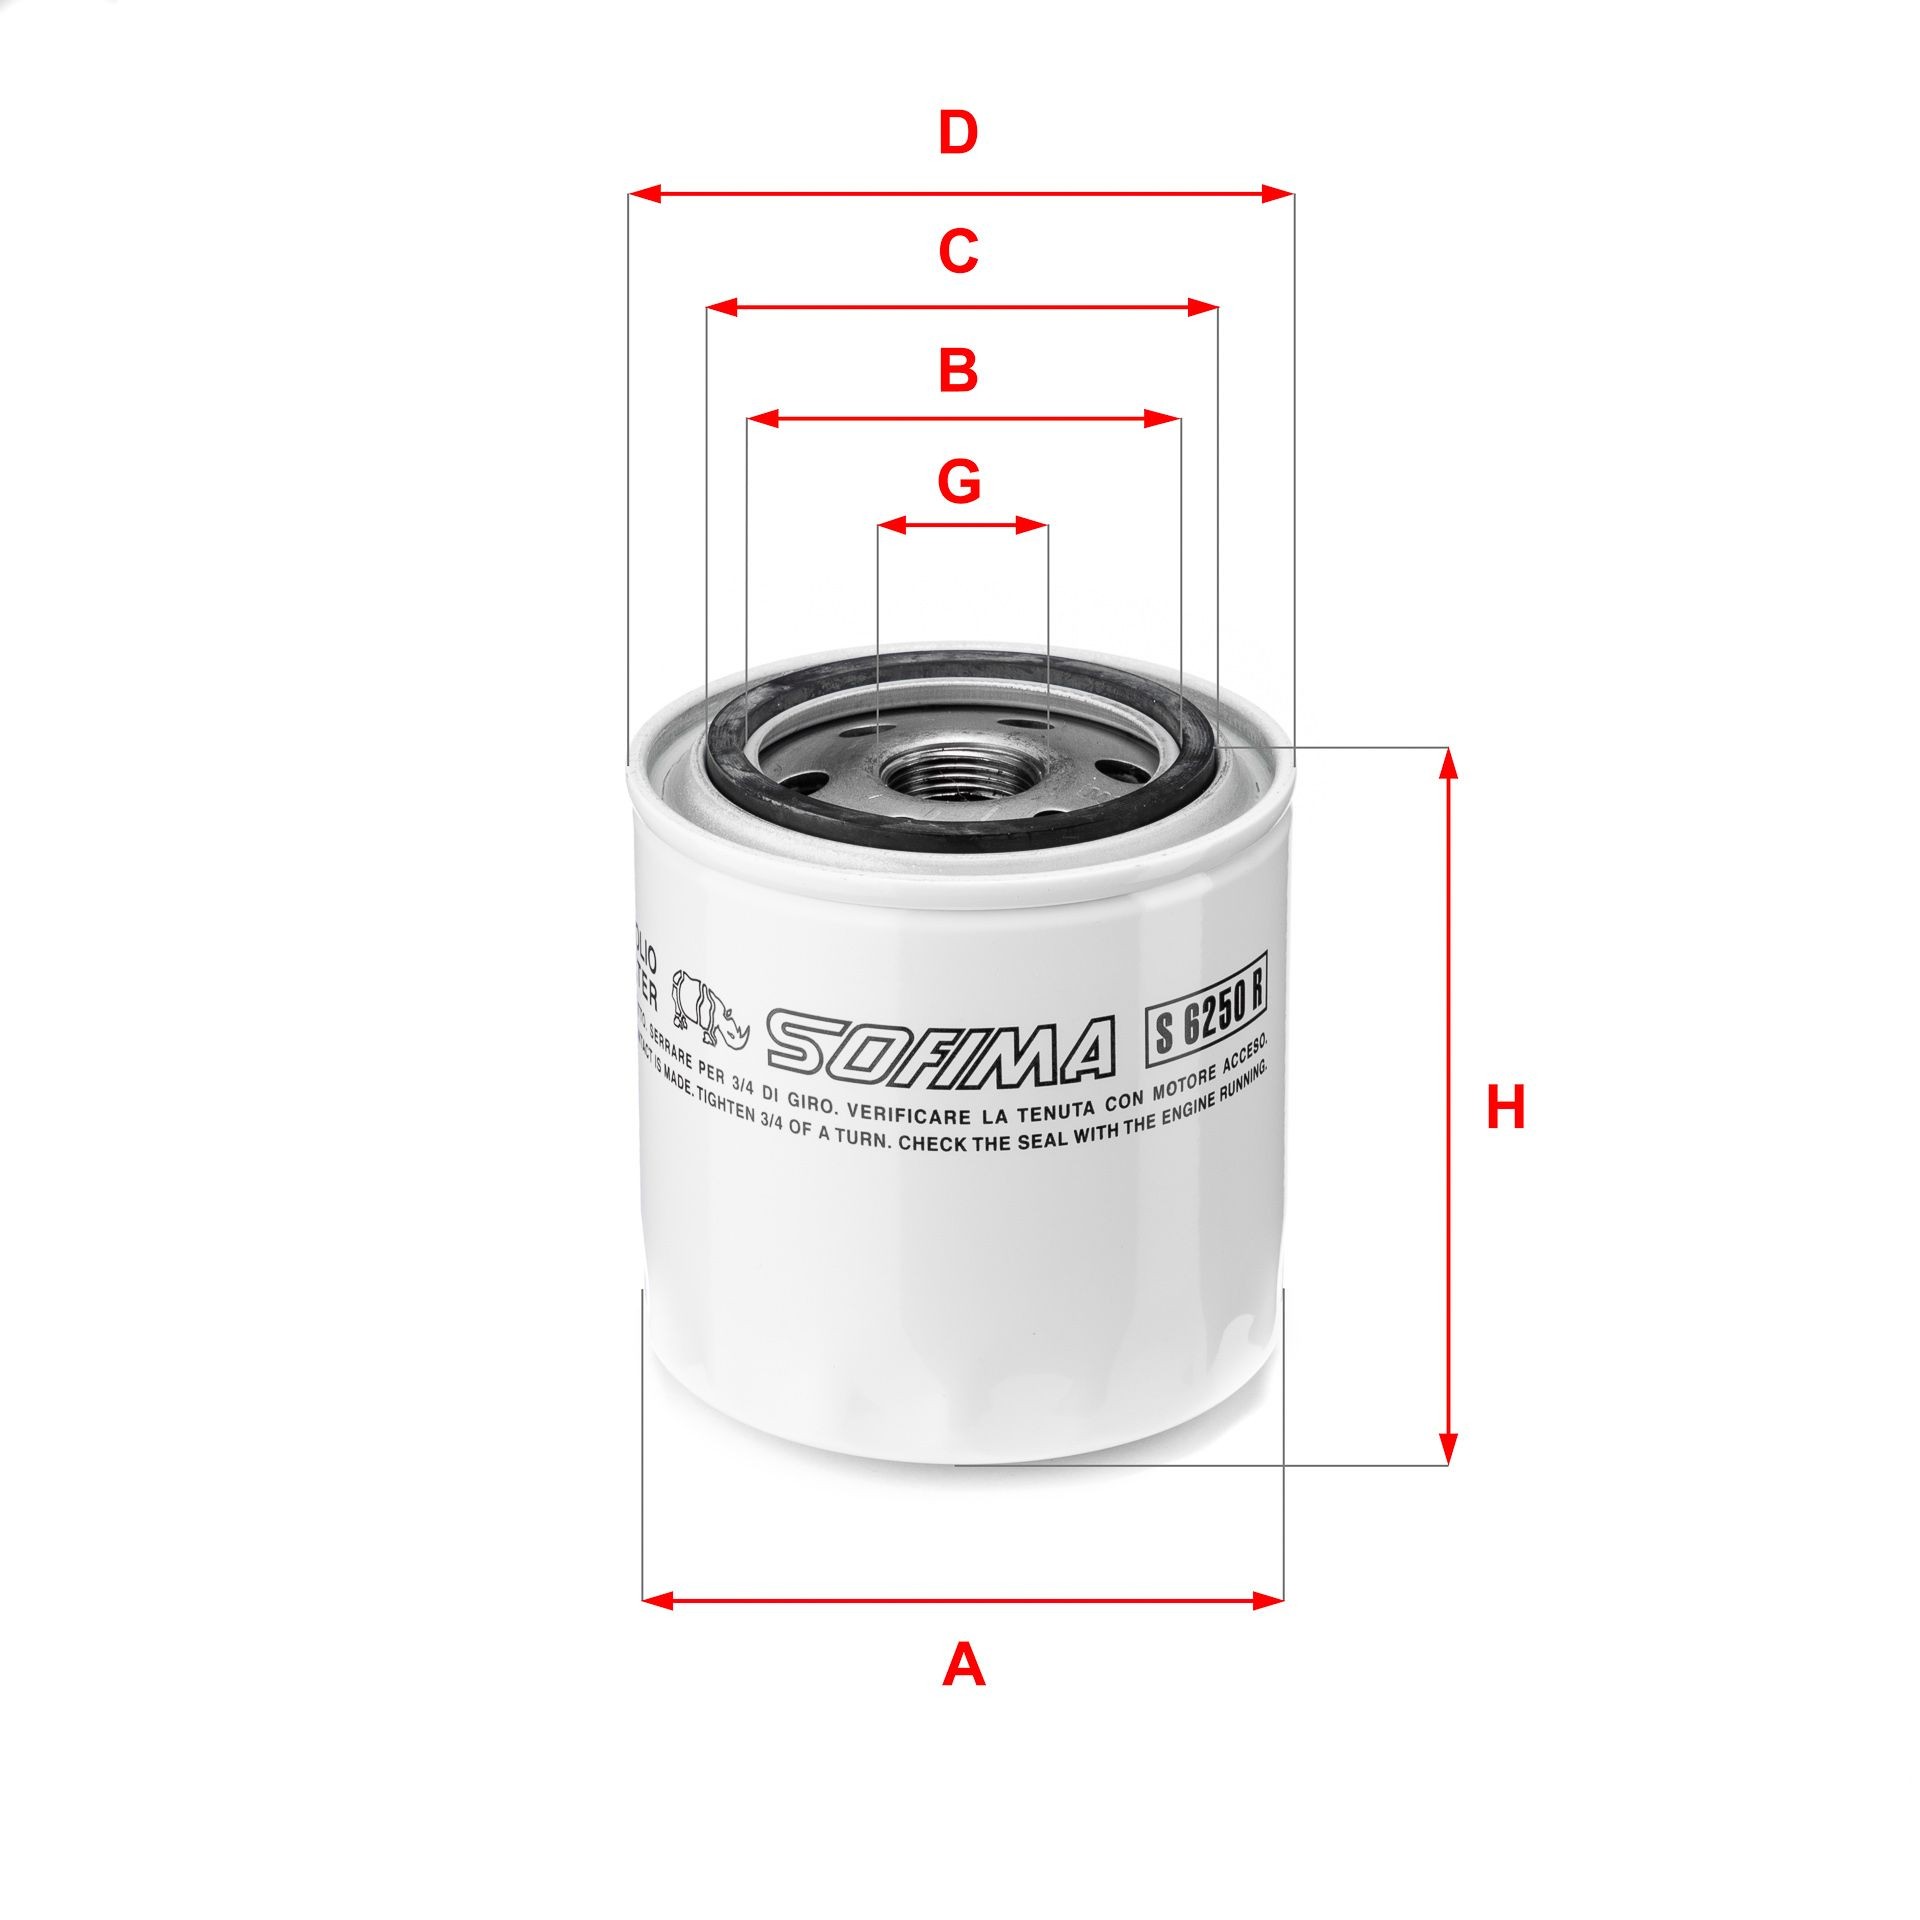 SOFIMA S 6250 R Oil filter M 22 X 1,5, with one anti-return valve, Spin-on Filter